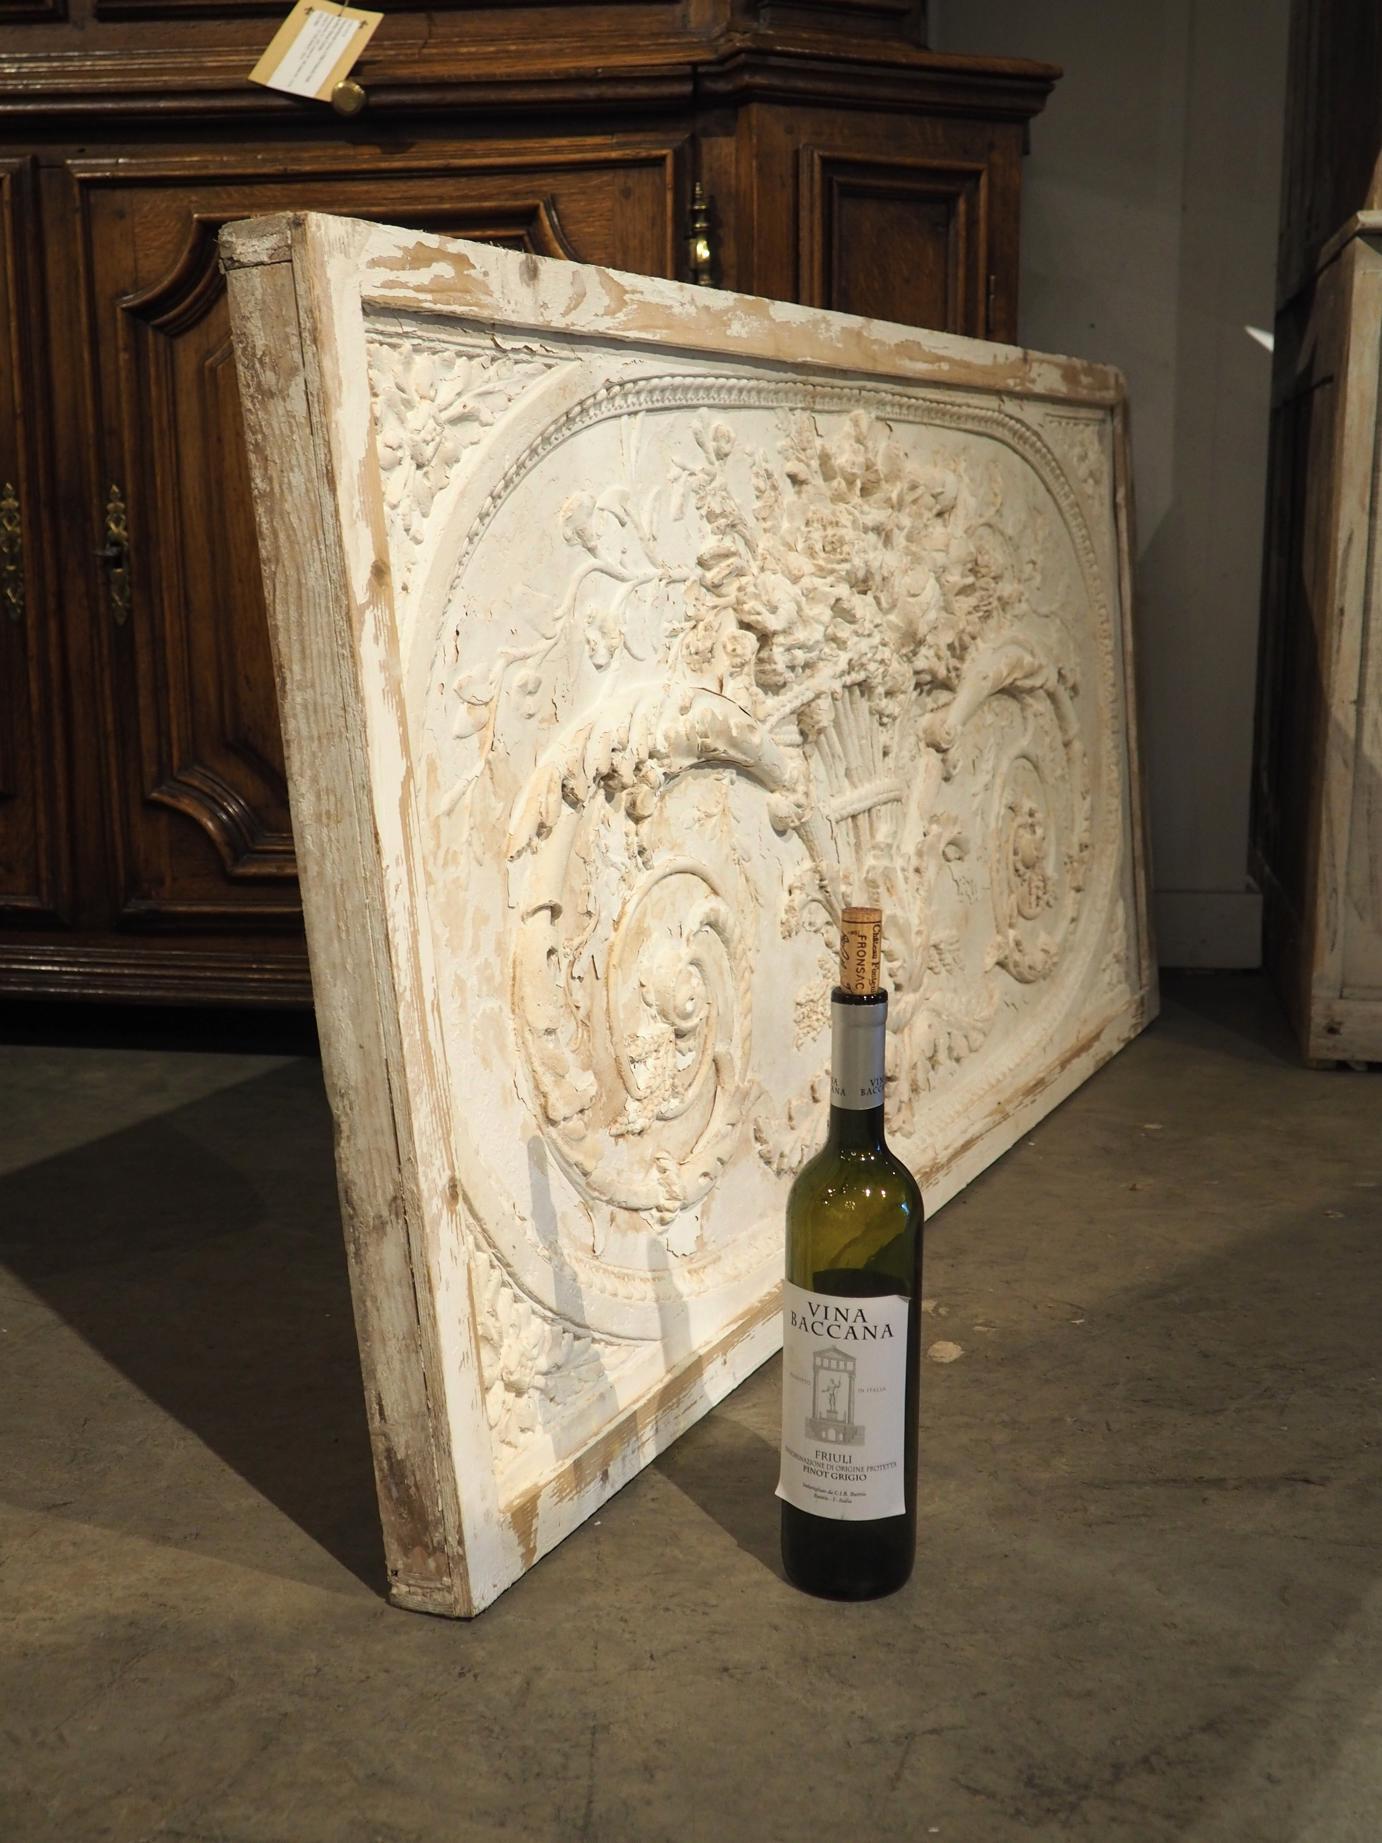 This beautiful parcel painted plaster and wood panel from Provence, France was made in the Louis XVI style.  It features a bas-relief rendering of a pair of foliate rinceaux emanating from a vase overflowing with a bouquet. The plaster is